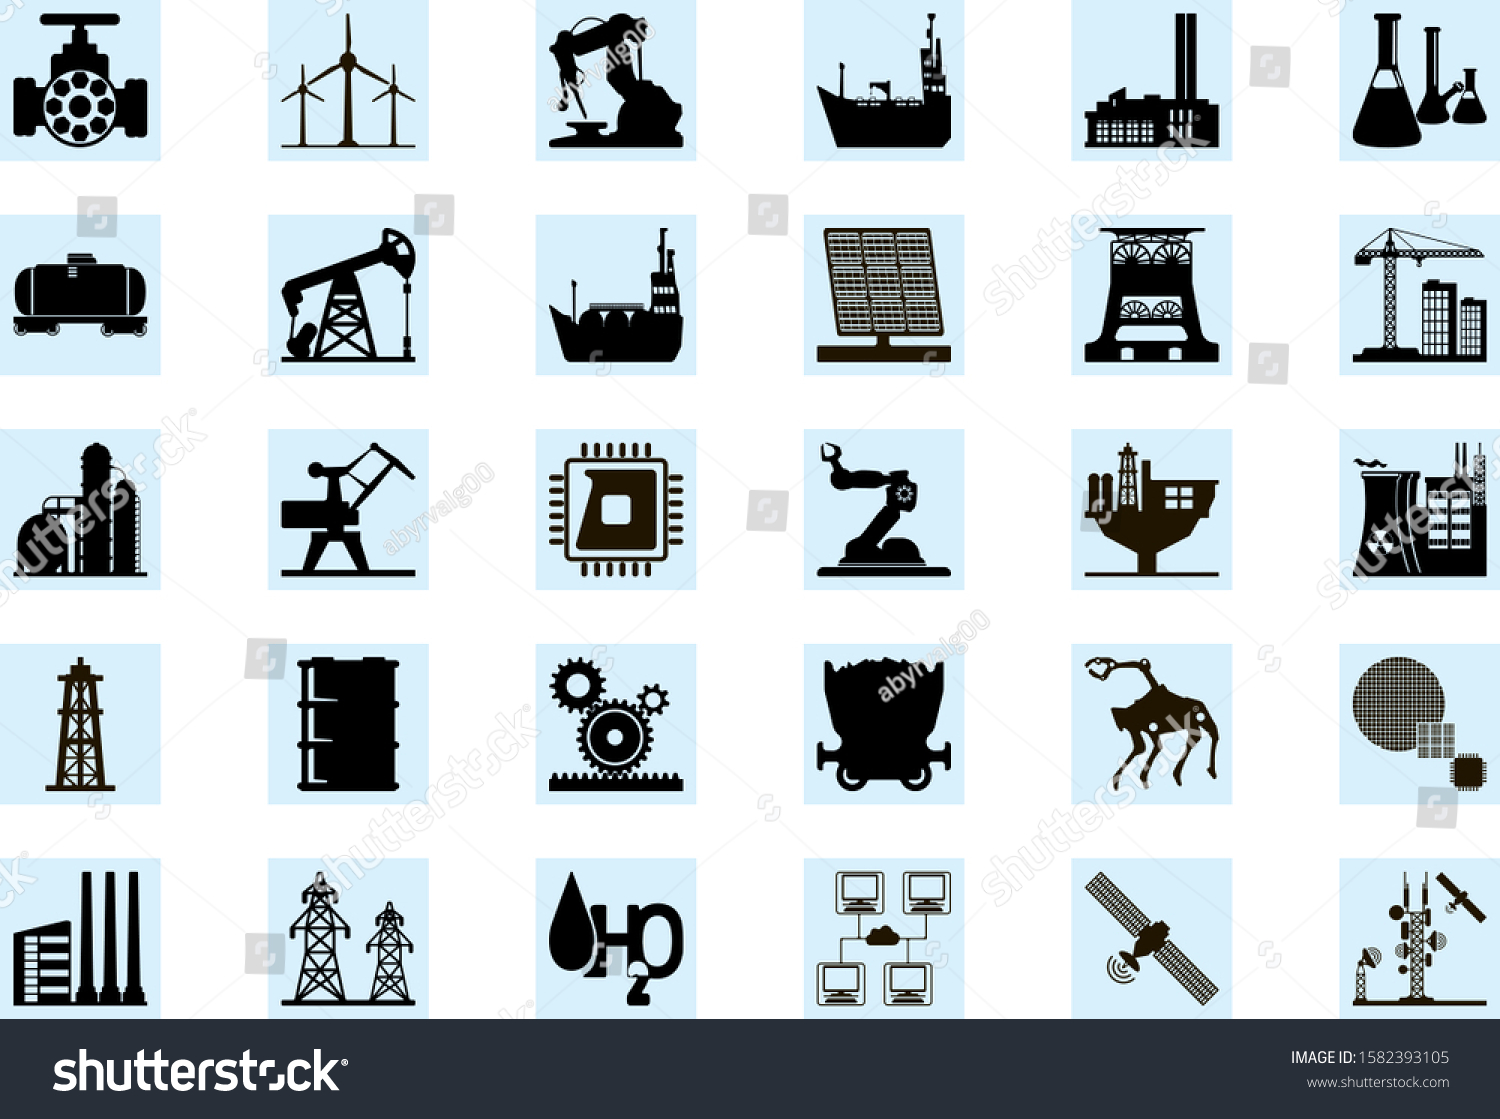 SVG of Set of abstract  silhouette industry icons featuring energy, oil an gas, solar, wind energy,  oil rigs, mining, power lines, robots, equipment, construction, telecommunications tower and satellite.  svg